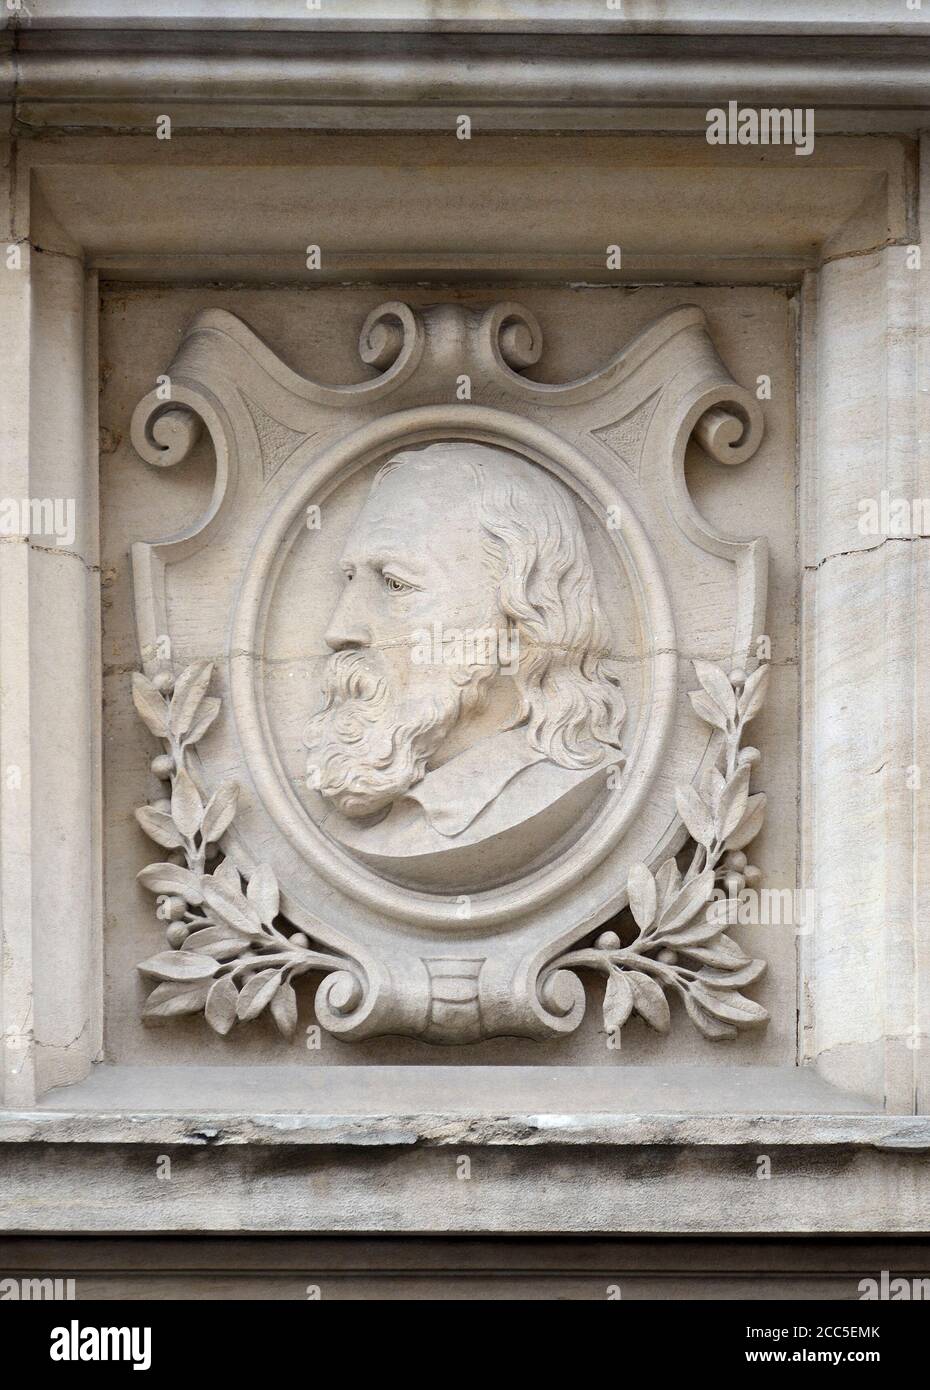 London, England, UK. Head of Alfred Lord Tennyson (1809 – 1892) British poet,  on the facade of the Old Westminster Library in Great Smith Street. Stock Photo